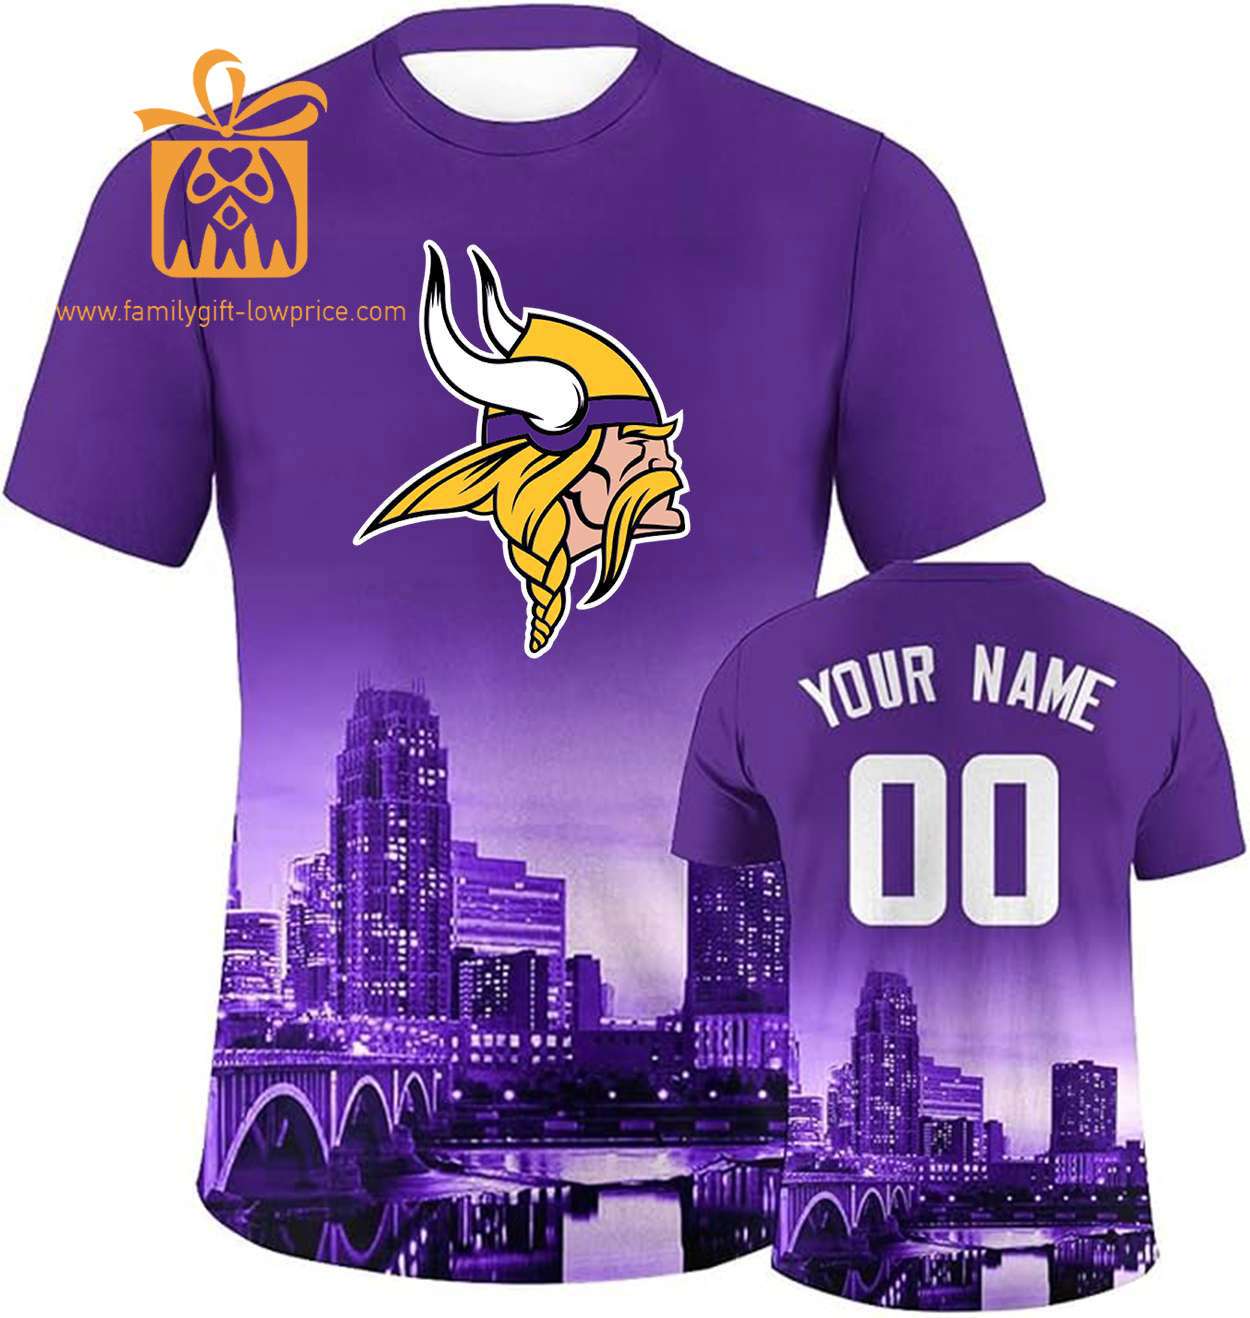 Minnesota Vikings Custom Football Shirts – Personalized Name & Number, Ideal for Fans